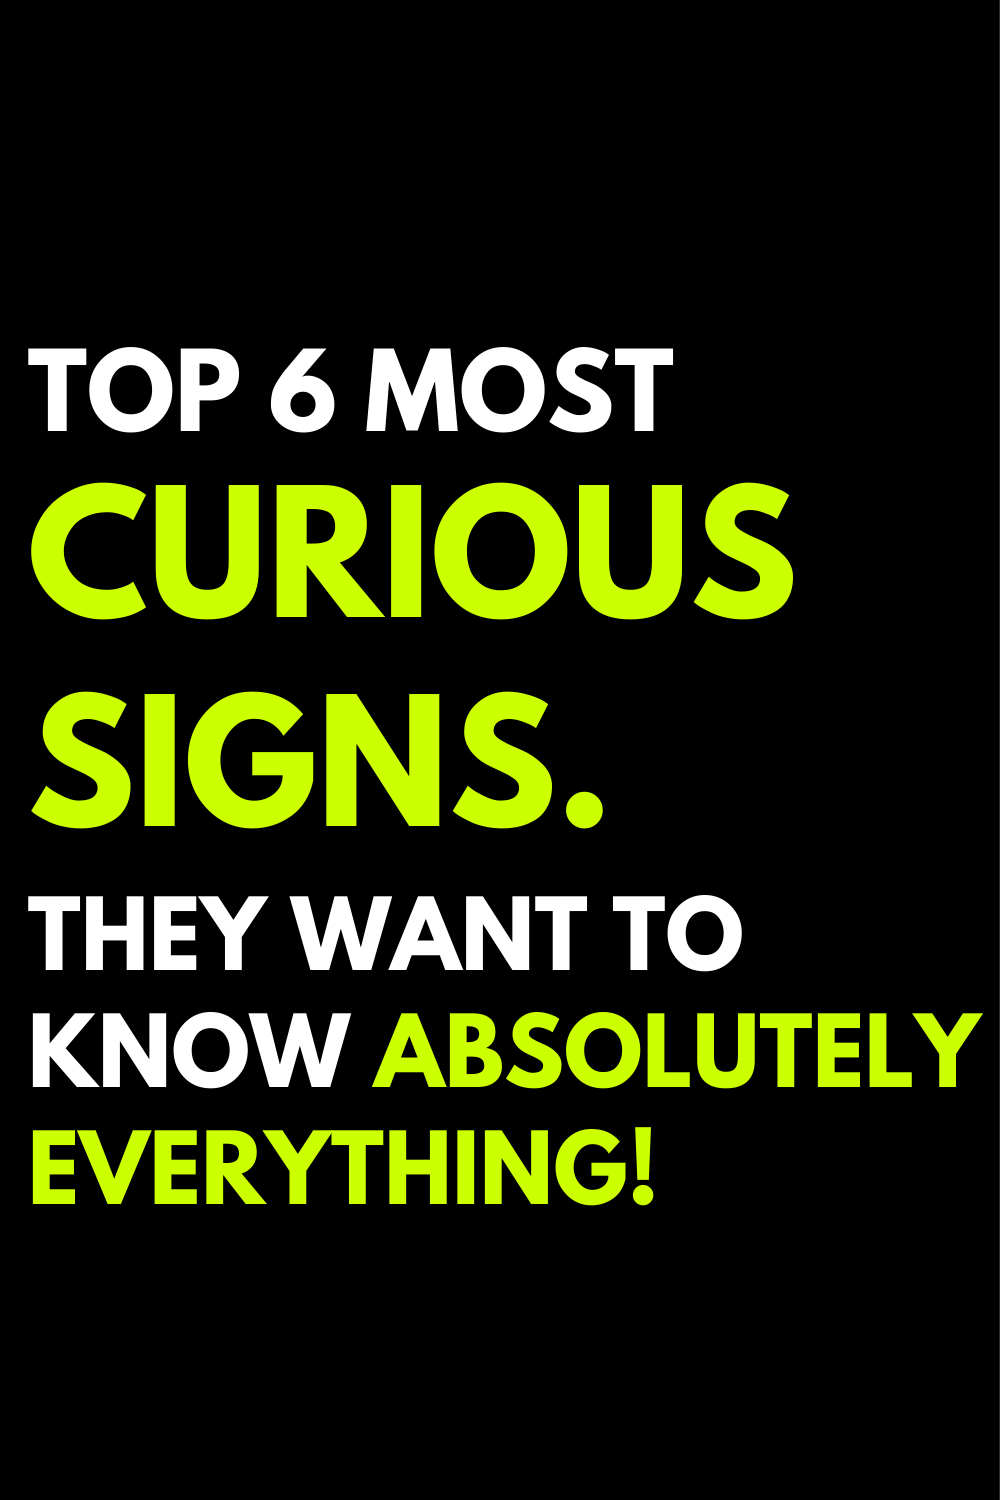 Top 6 most curious signs. They want to know absolutely everything!